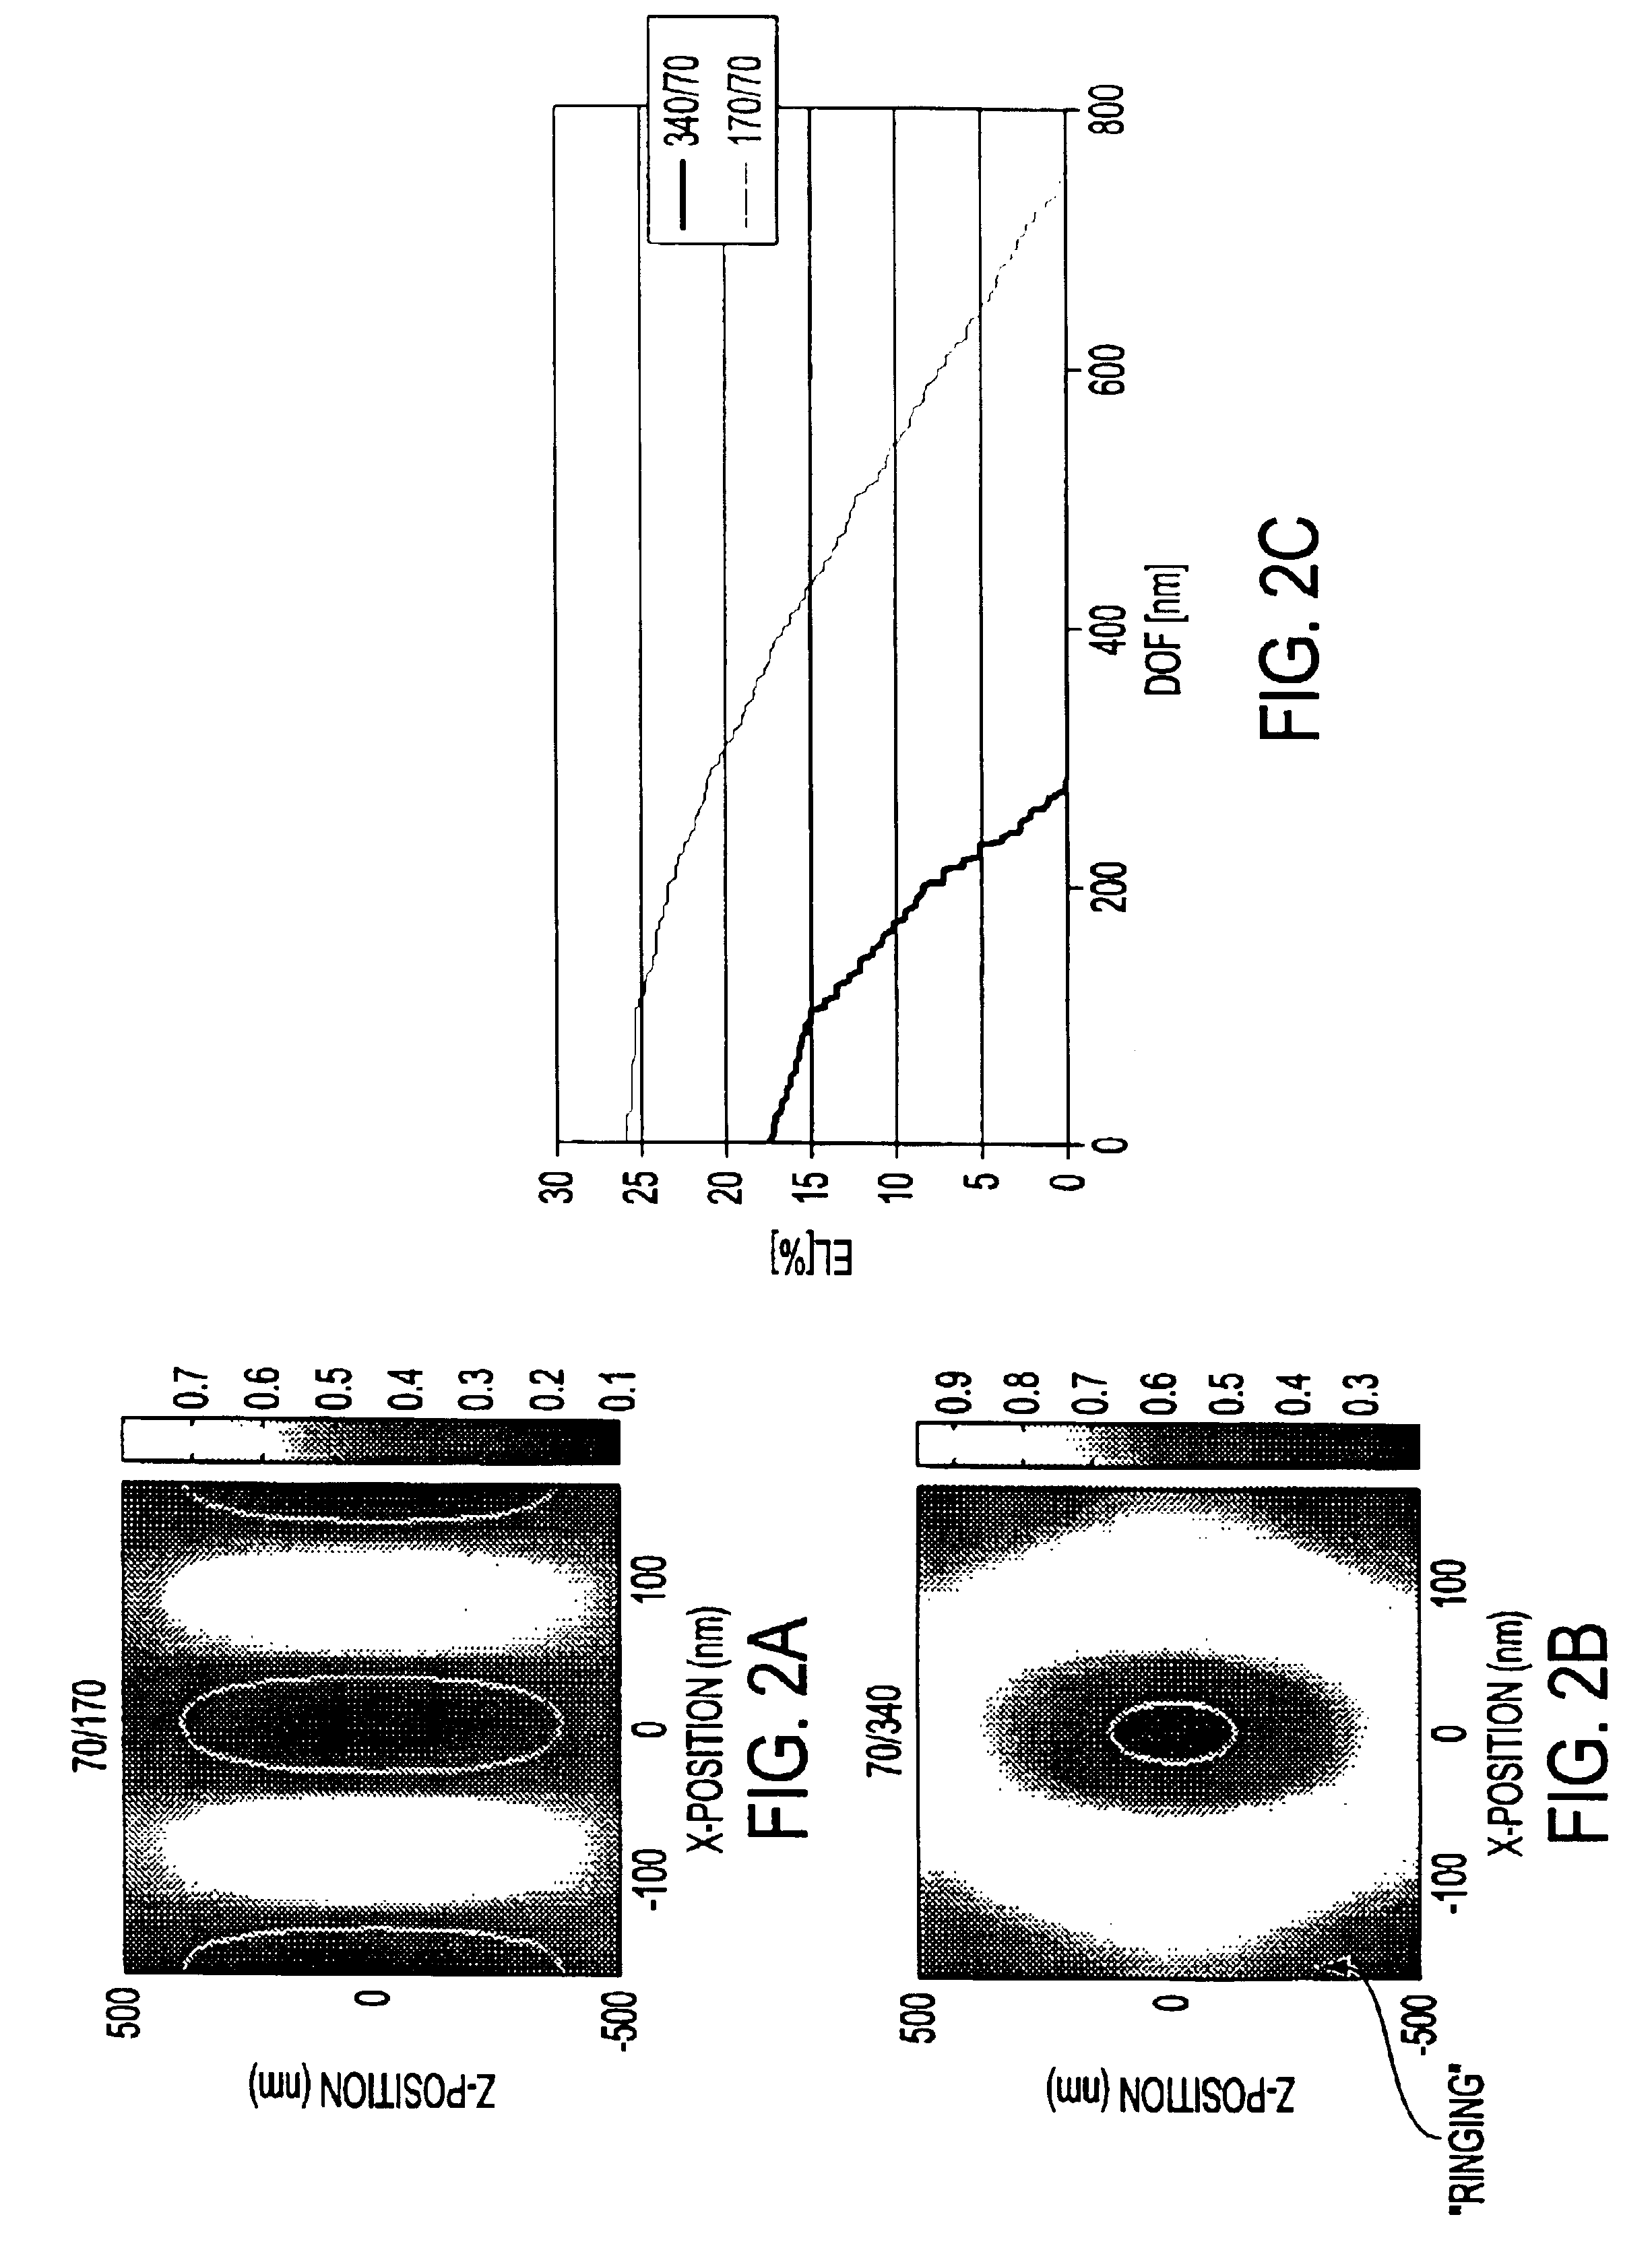 Method of removing assist features utilized to improve process latitude